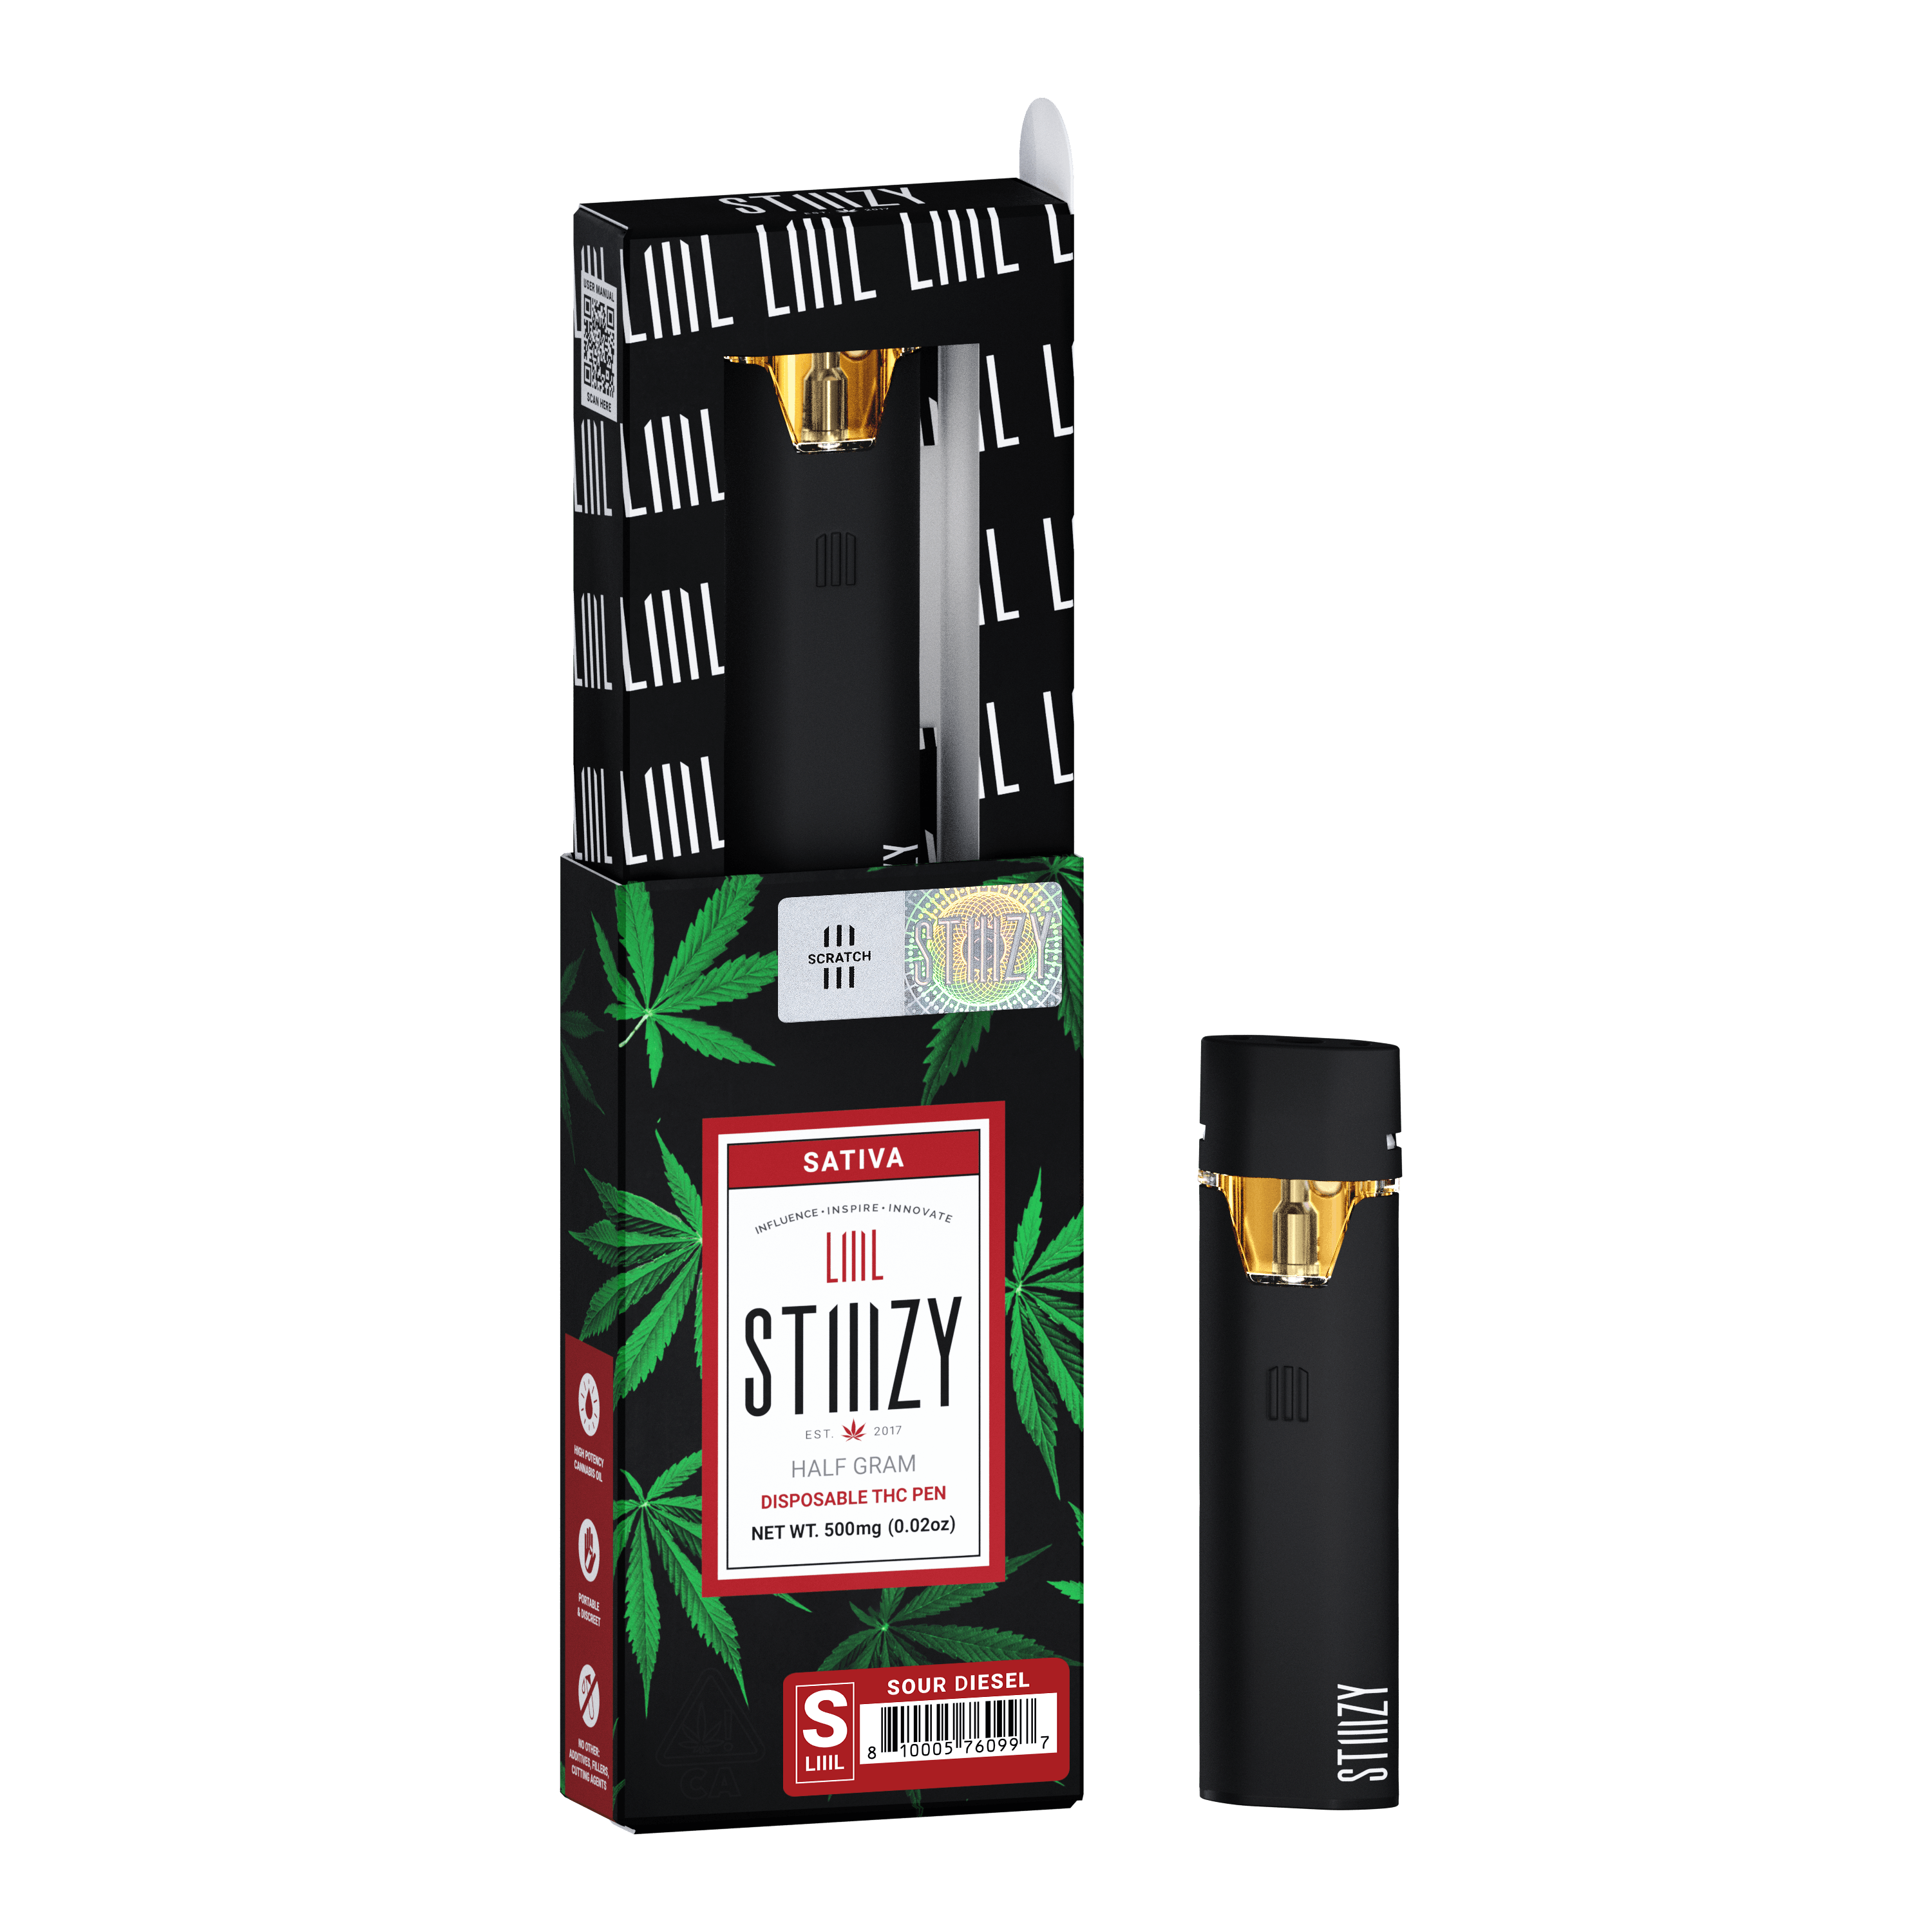 Two disposable weed pens with distillate from the Sour Diesel strain are showcased with their black, red, and green box.